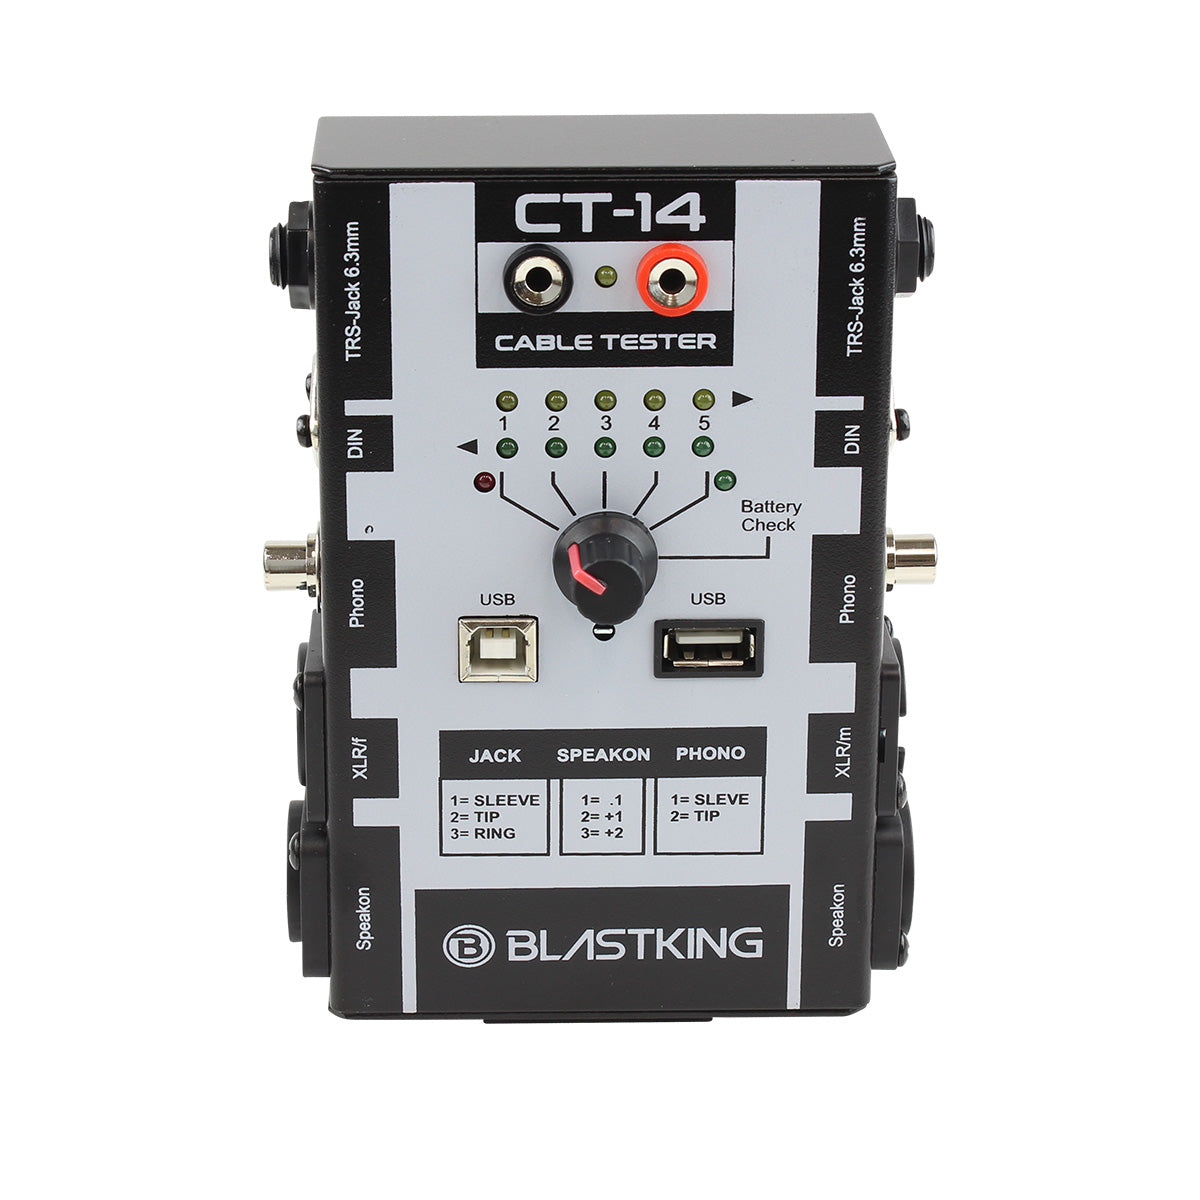 Blastking CT-14 Cable Tester